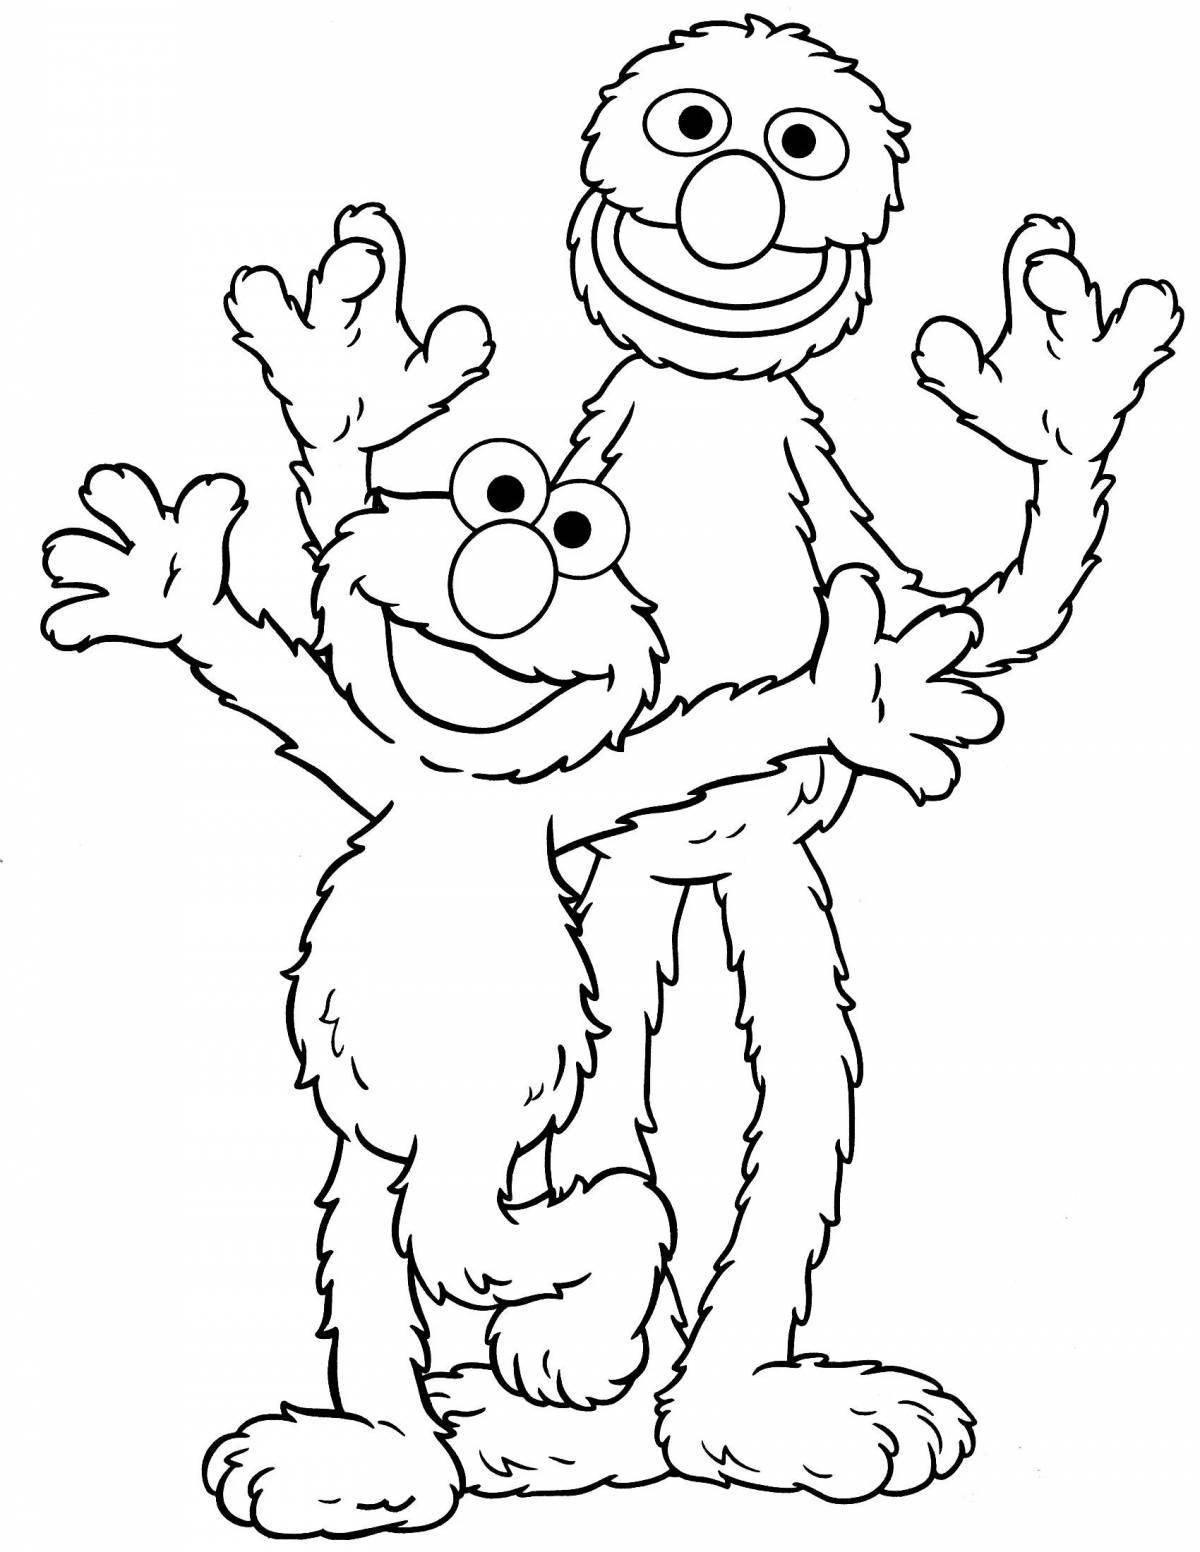 Playful sesame street coloring page